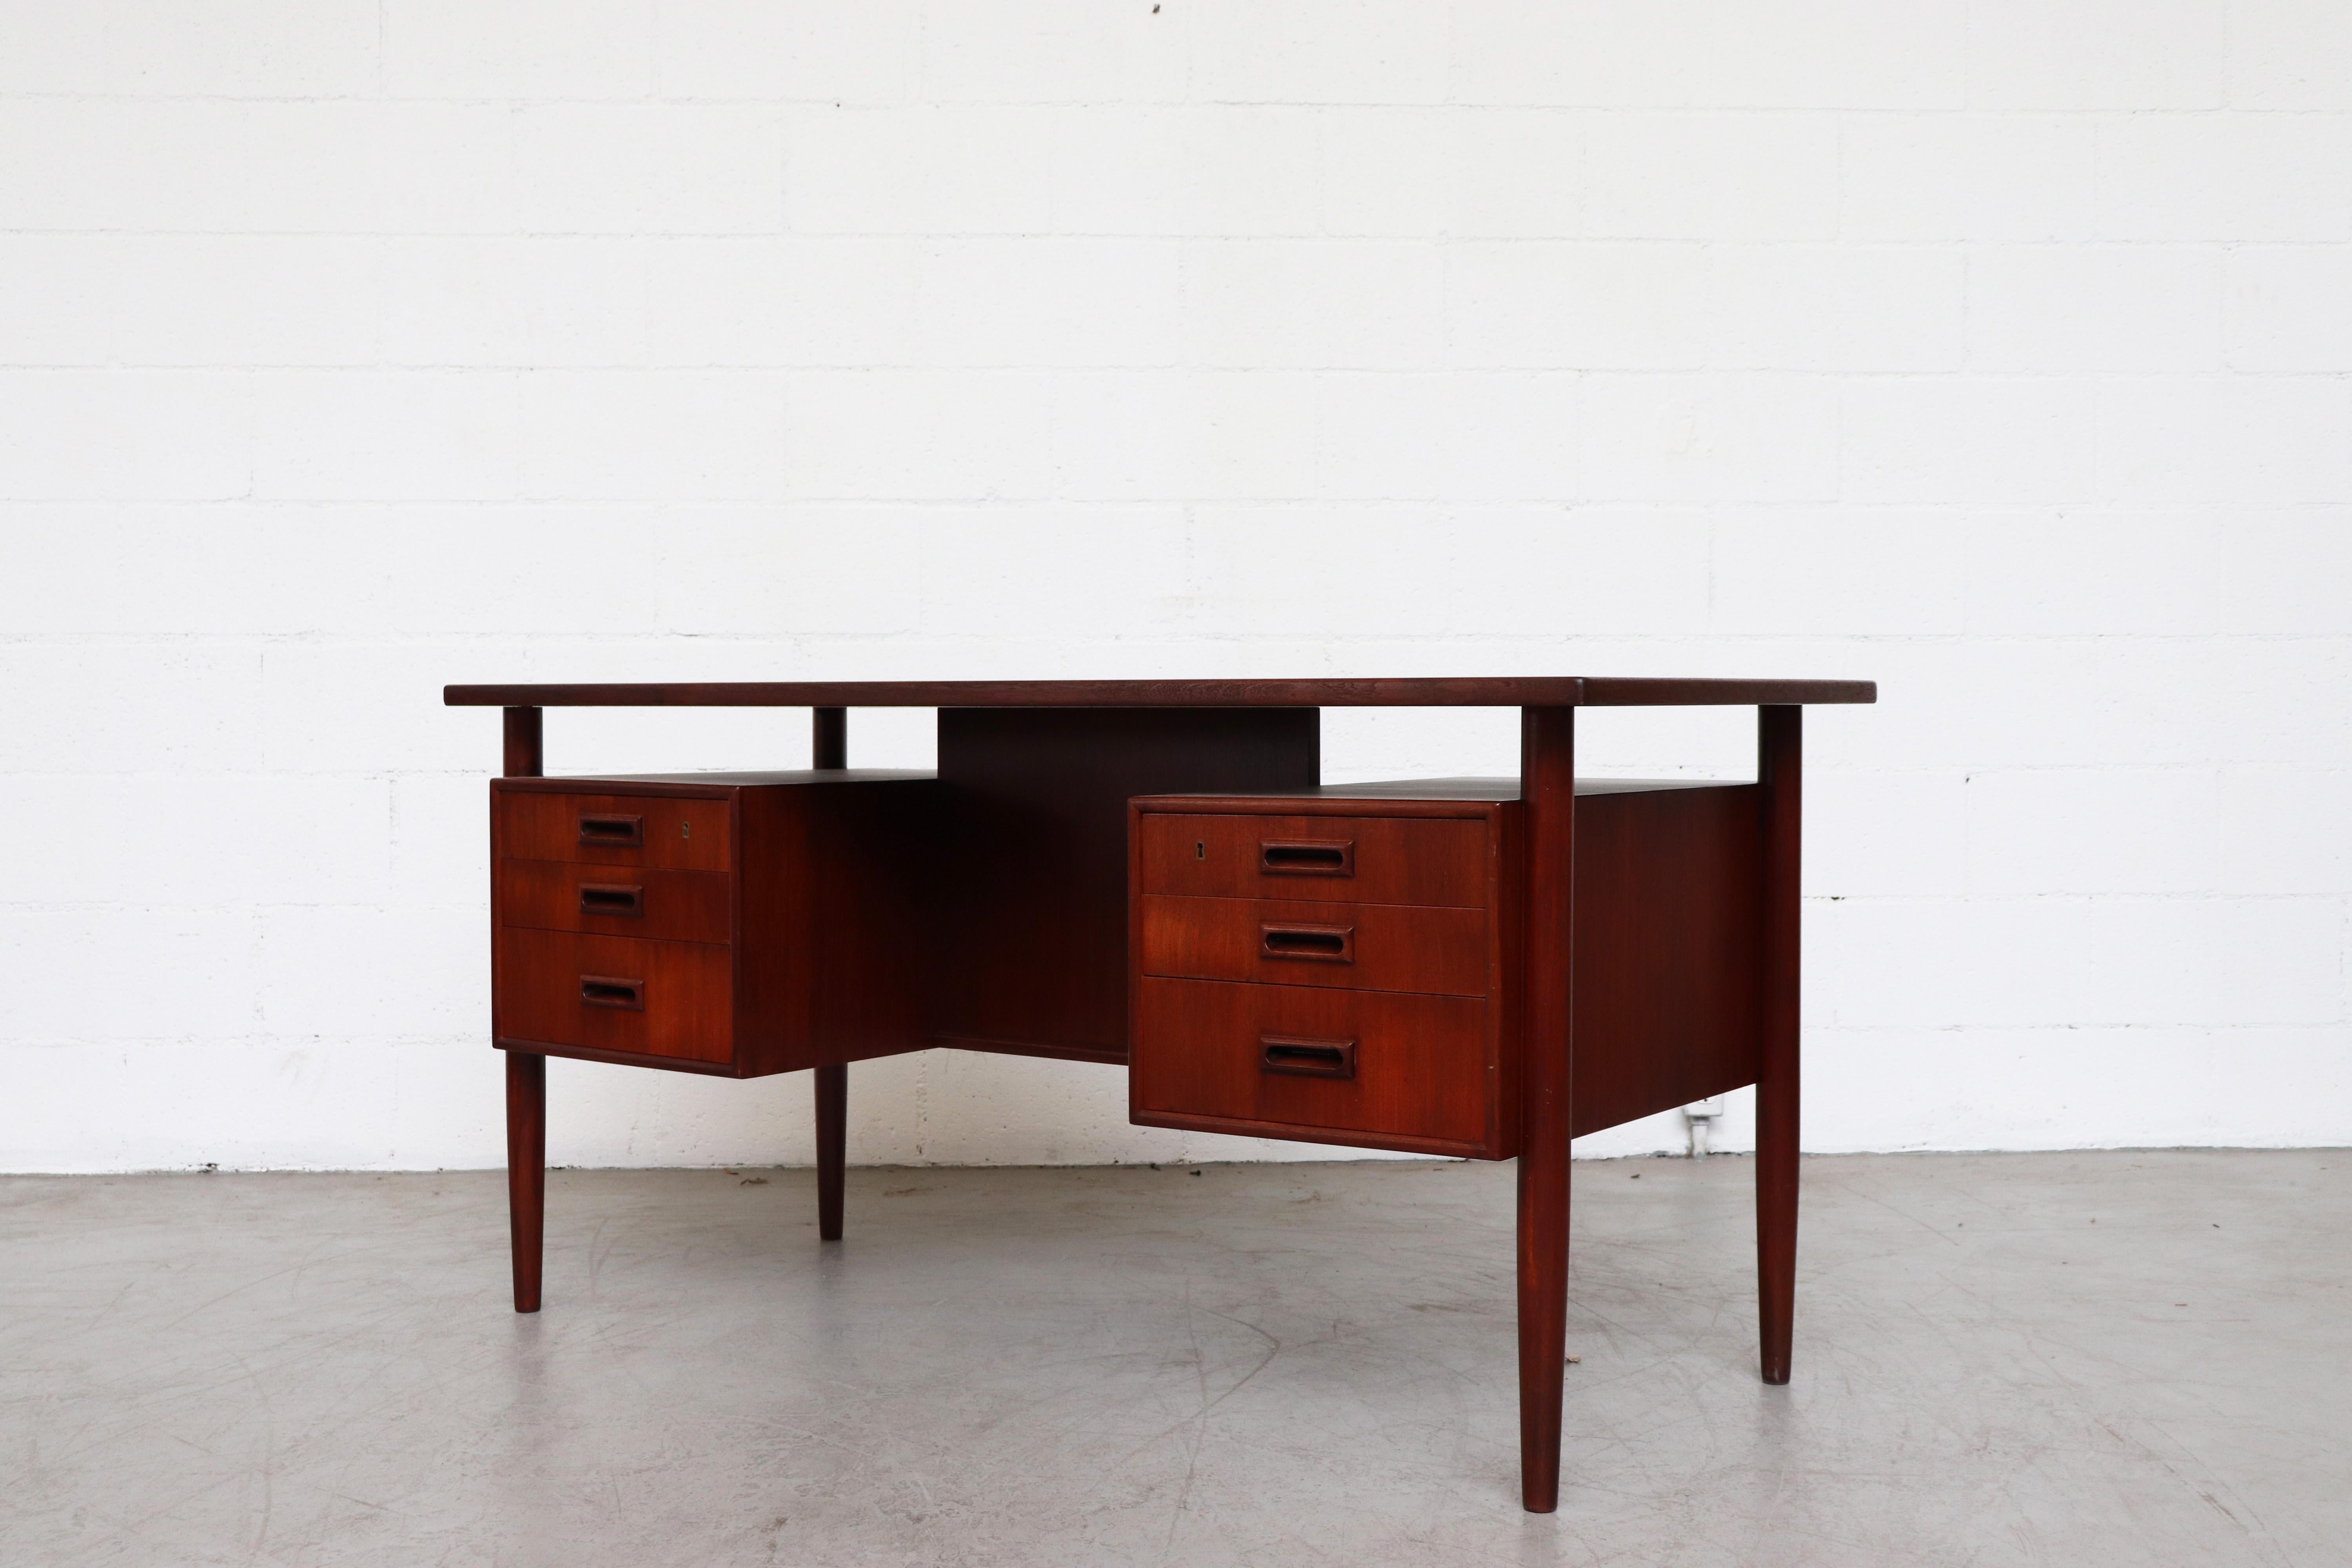 William Watting style teak desk with six drawers, floating top, and bookshelf cubbies on the back side. In original condition with some signs of wear consistent with its age and usage.